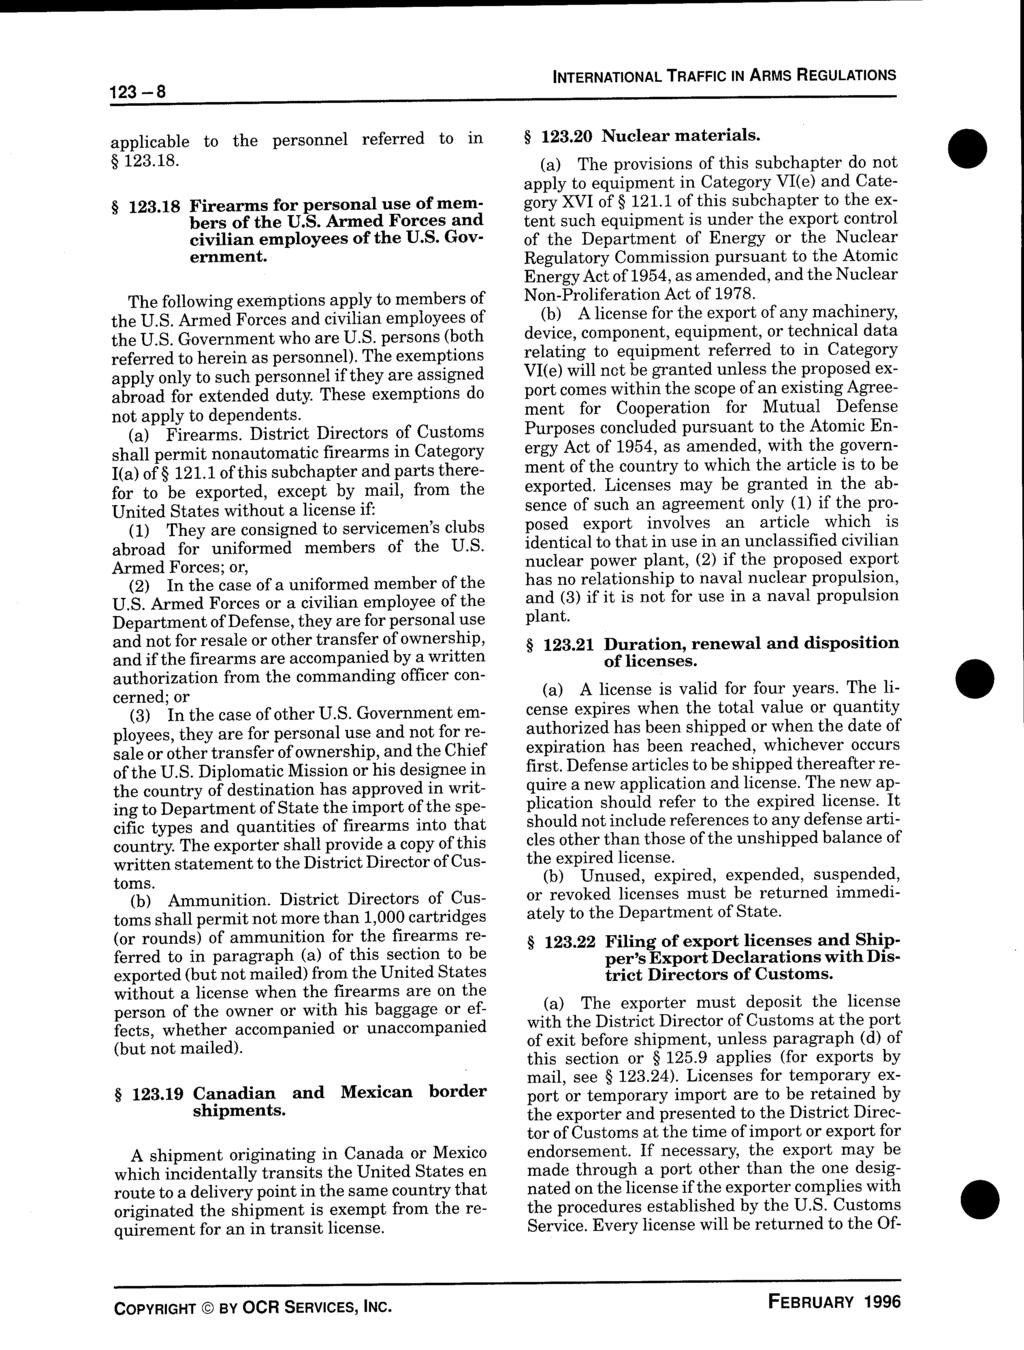 123-8 applicable to the personnel referred to in 123.18. 123.18 Firearms for personal use of members of the U.S. Armed Forces and civilian employees of the U.S. Government.